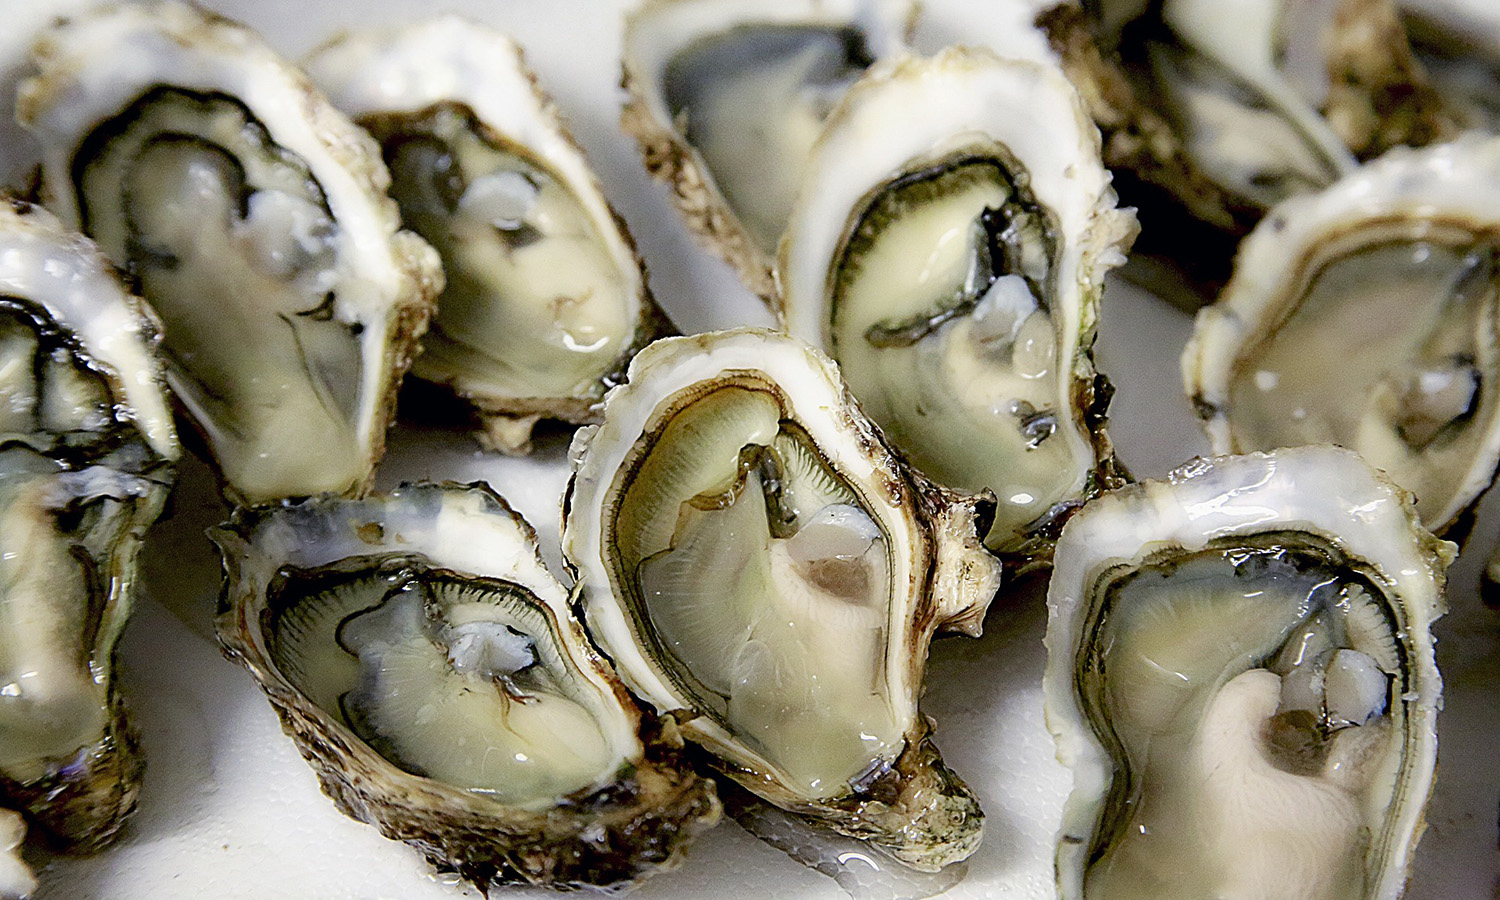 Can dogs eat oysters and what are the health benefits feeding oysters to my dog